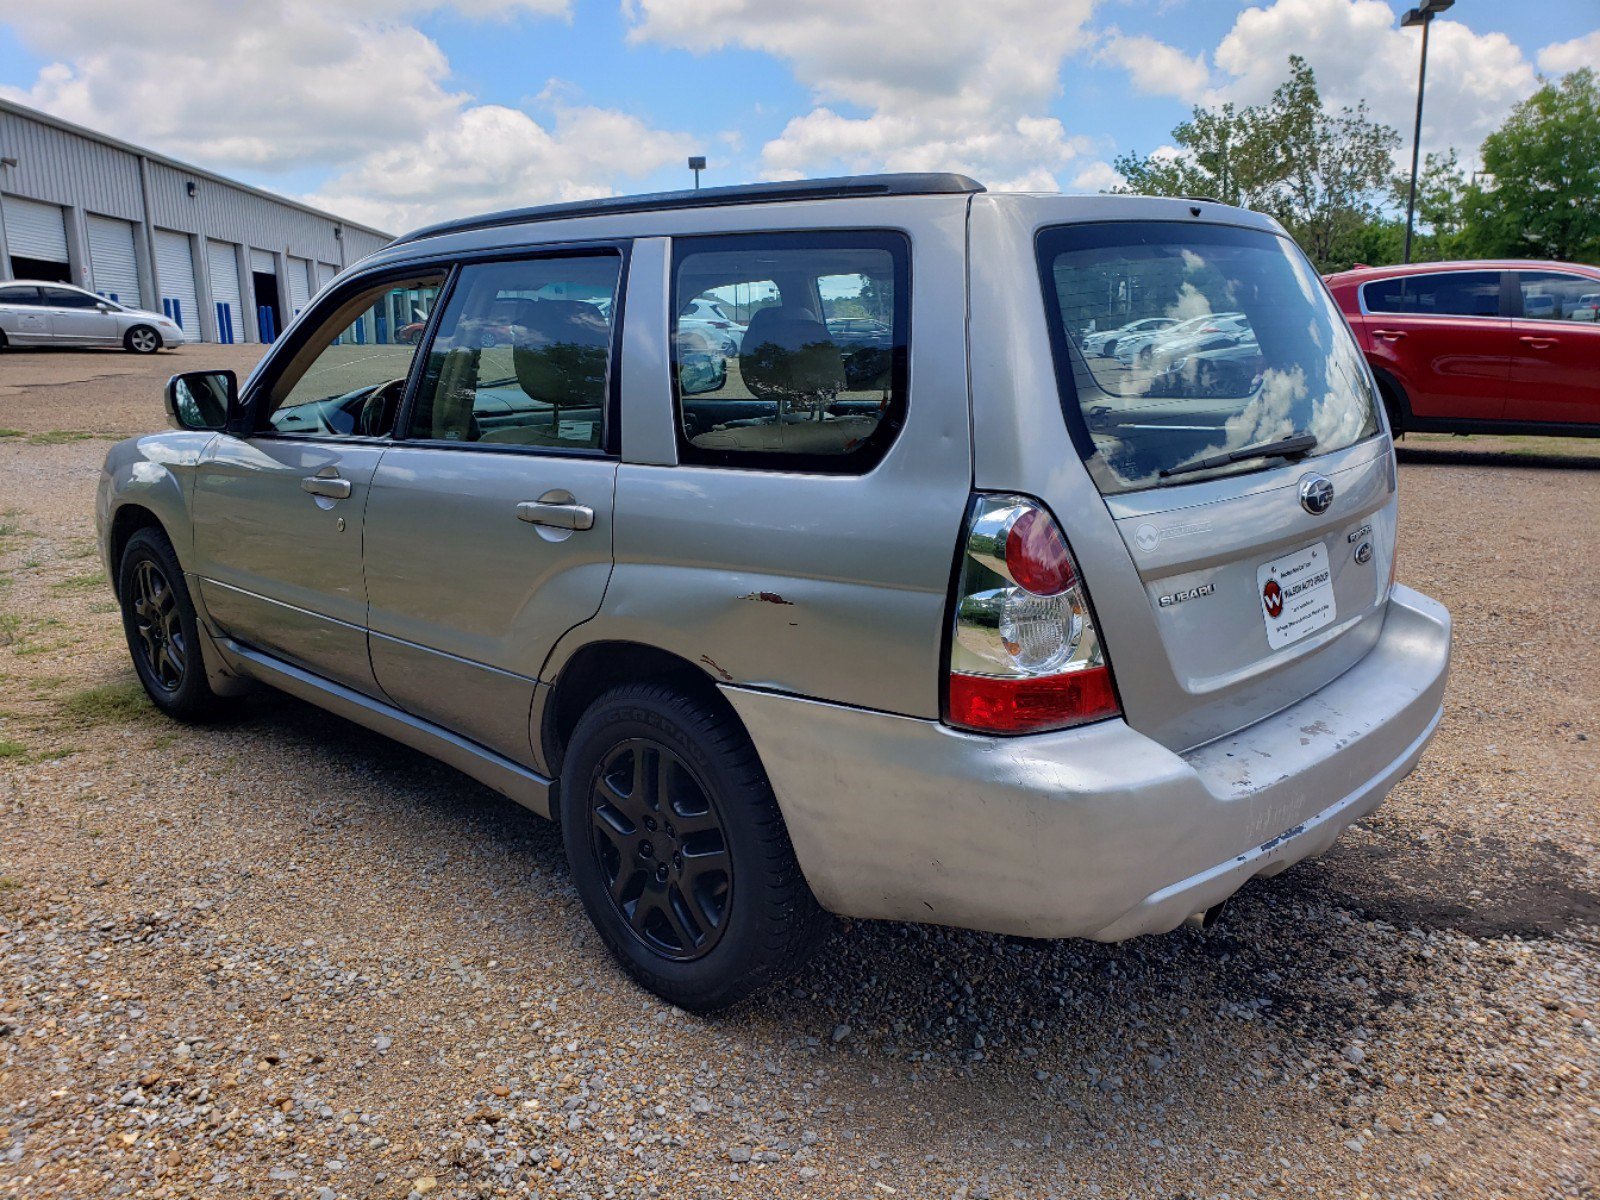 PreOwned 2006 Subaru Forester 2.5 X L.L. Bean Edition AWD